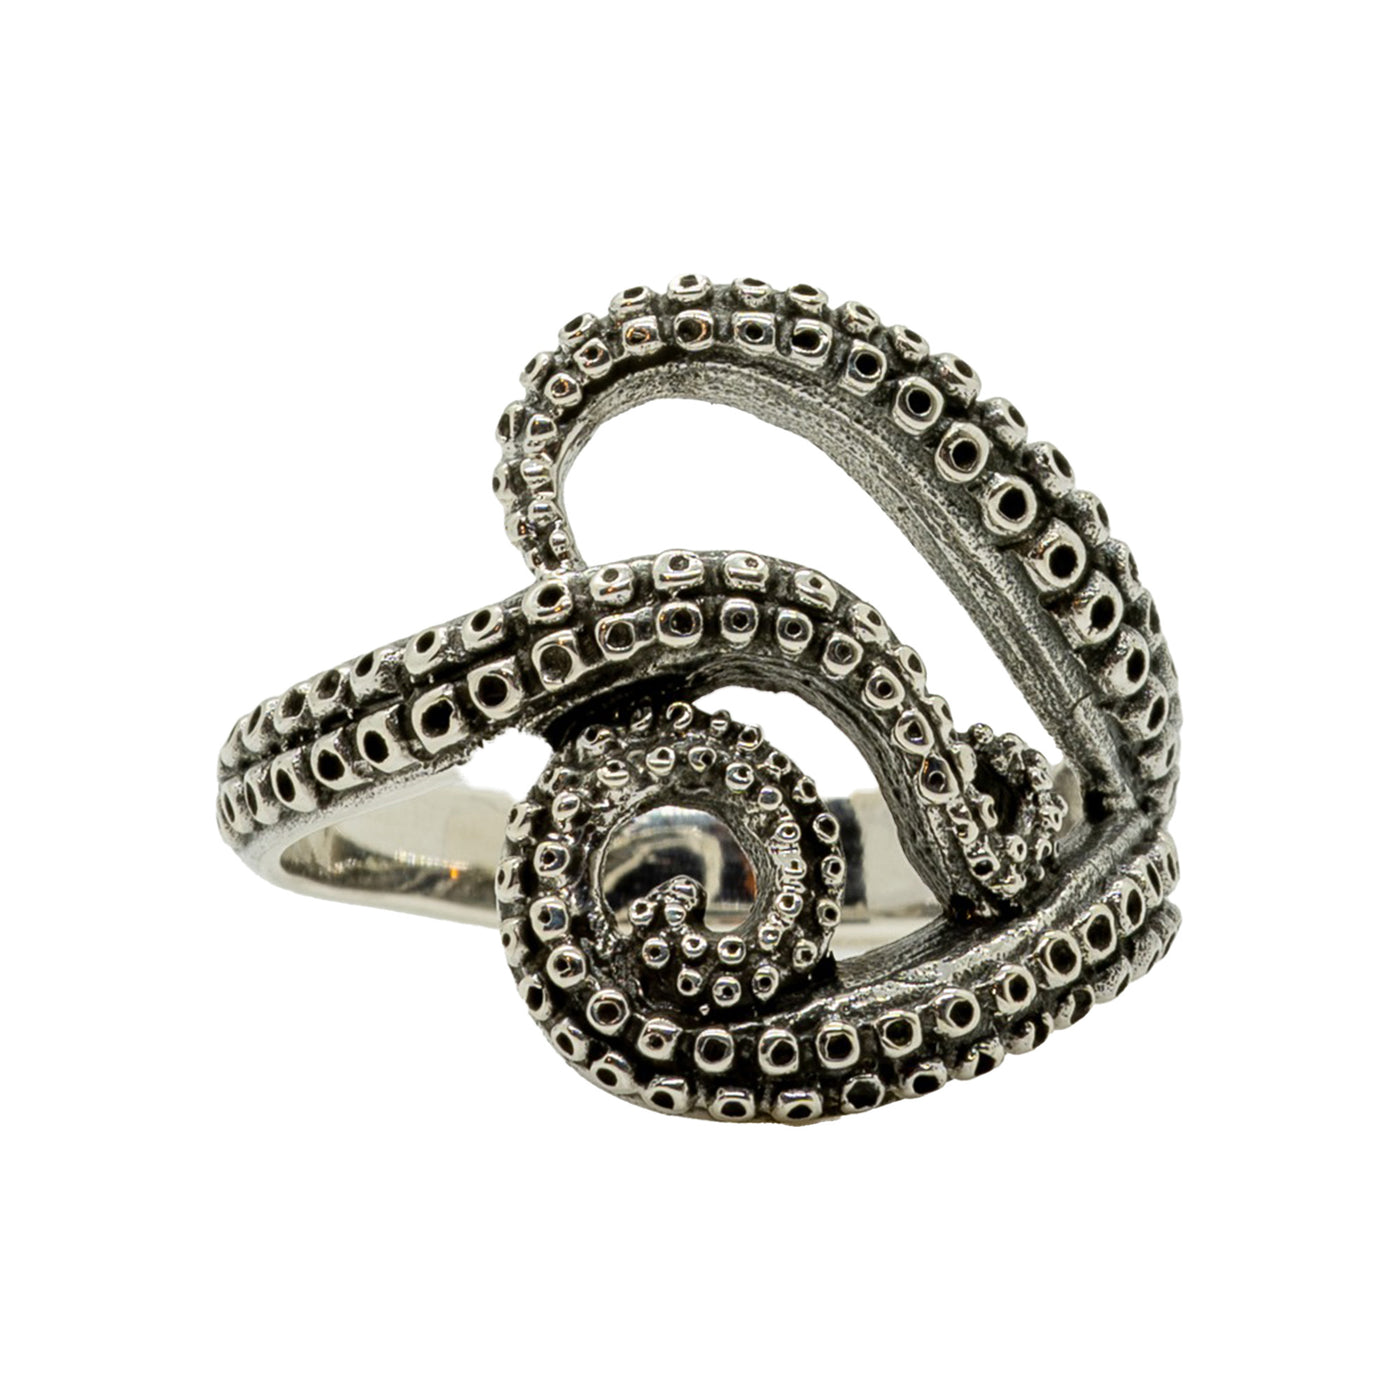 Octopus Tentacle 925 Sterling Silver Ring